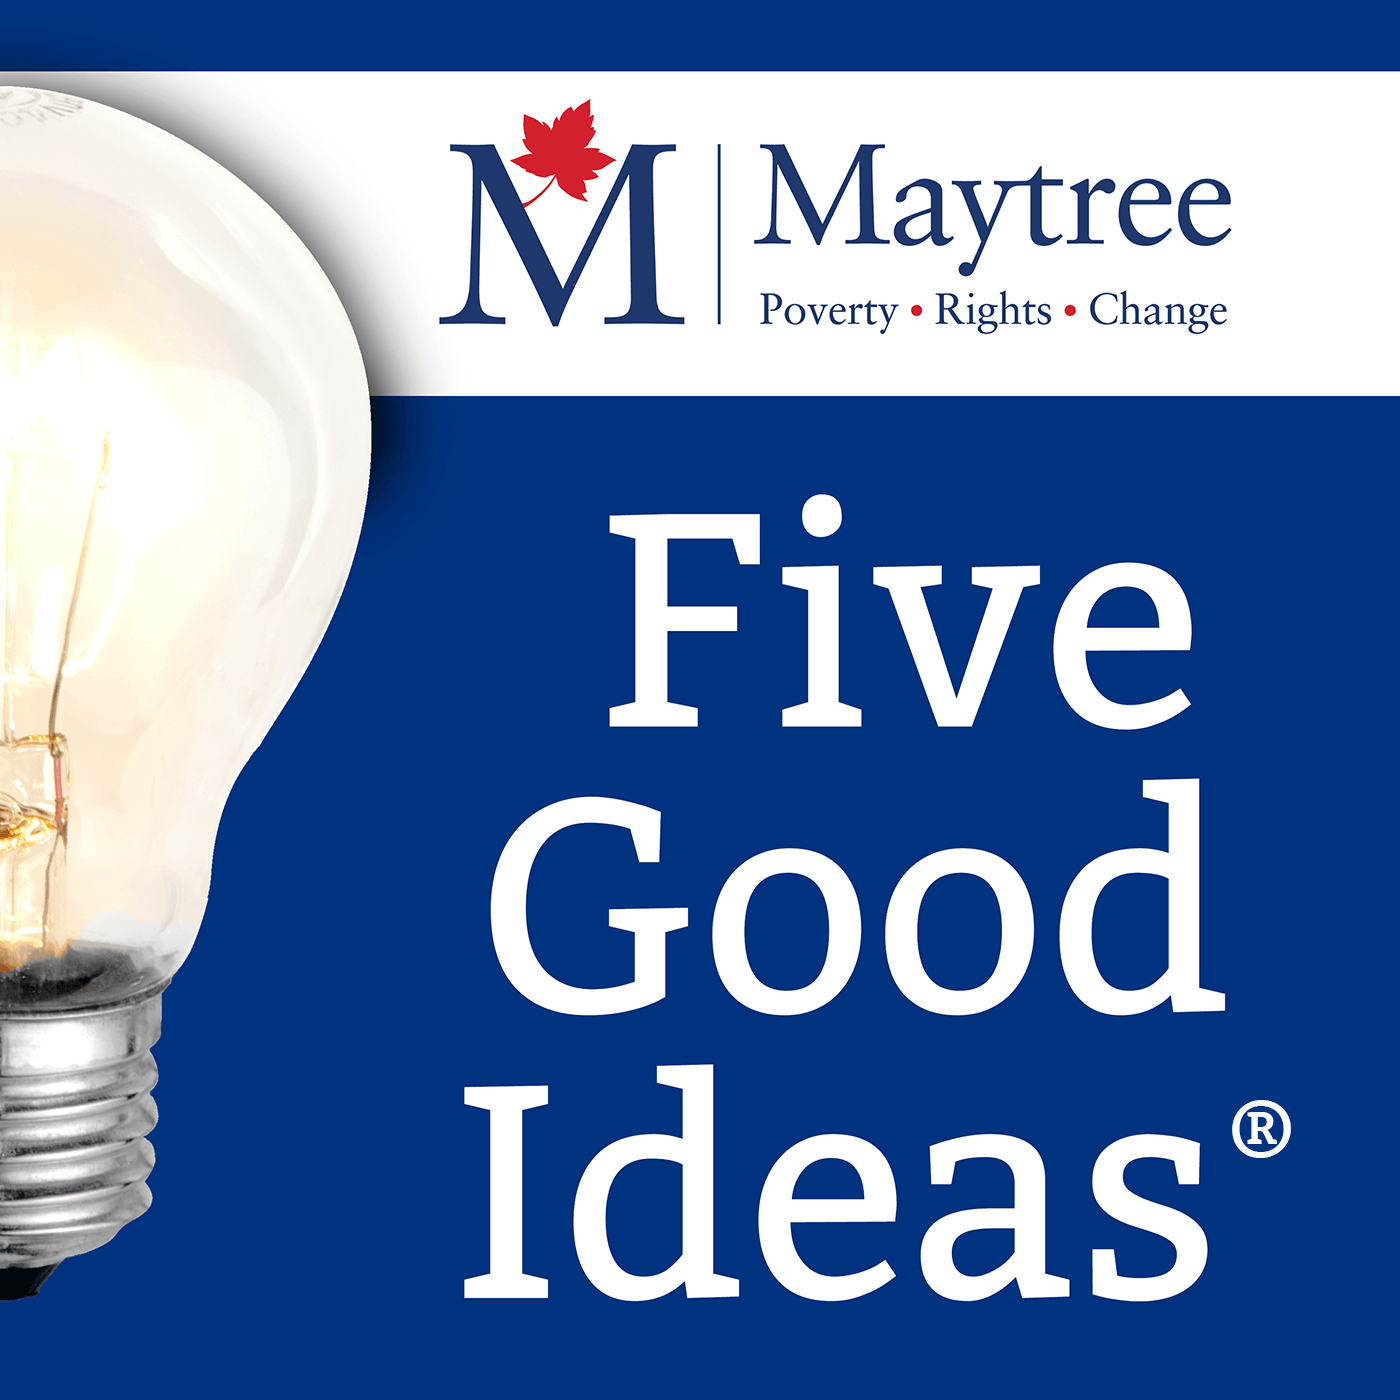 Five Good ideas for building thriving partnerships within the charitable and non-profit sector